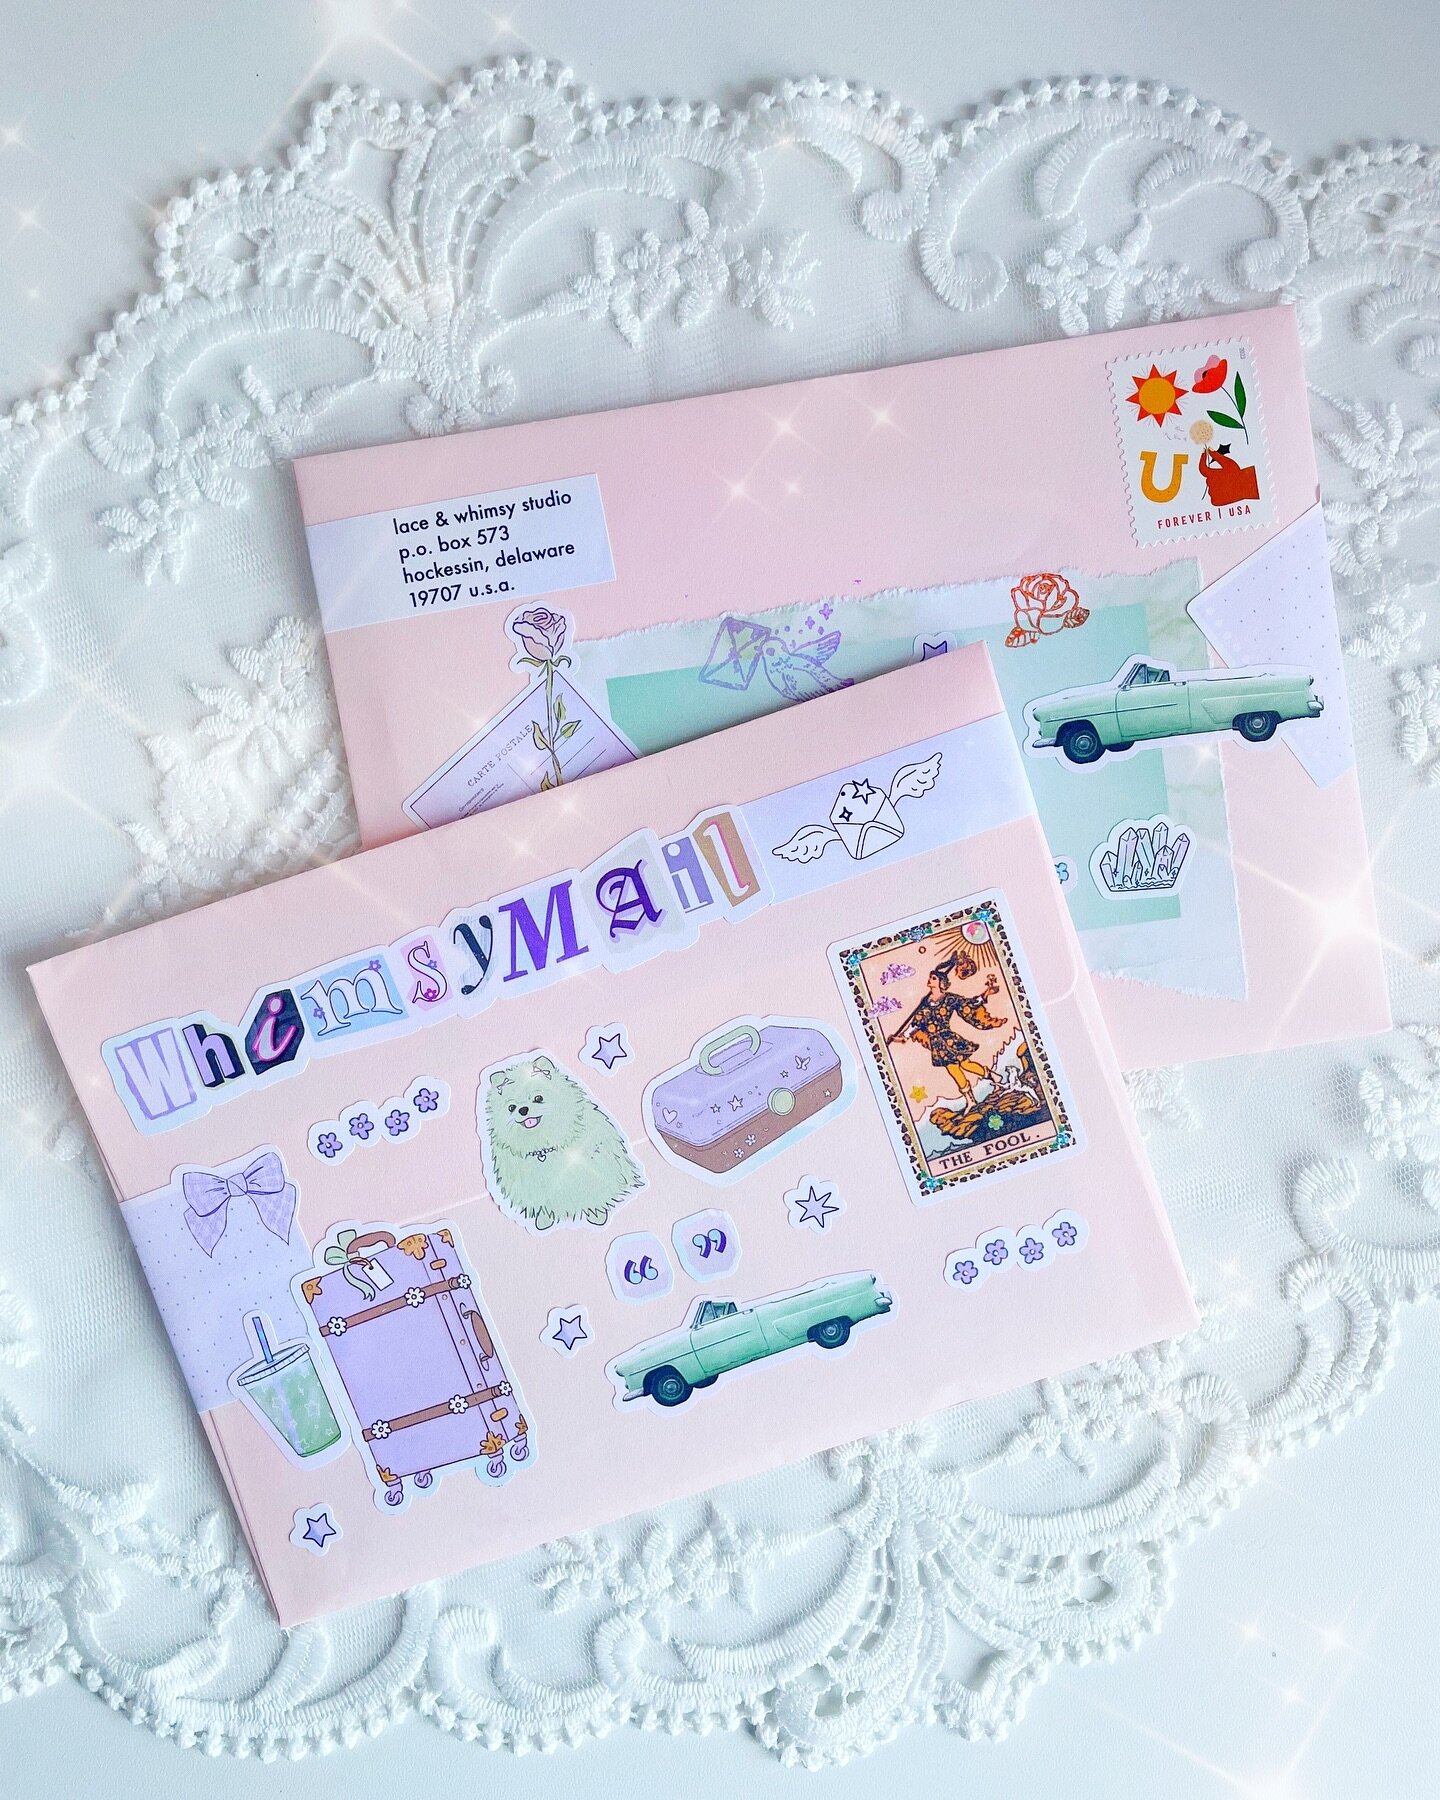 if you subscribe to whimsymail before the end of march, this is the sticker pack you&rsquo;ll start with. march&rsquo;s whimsymail sticker collection came together so cute! ♡ enrollment for april opens monday &mdash; april&rsquo;s theme is a sister-c